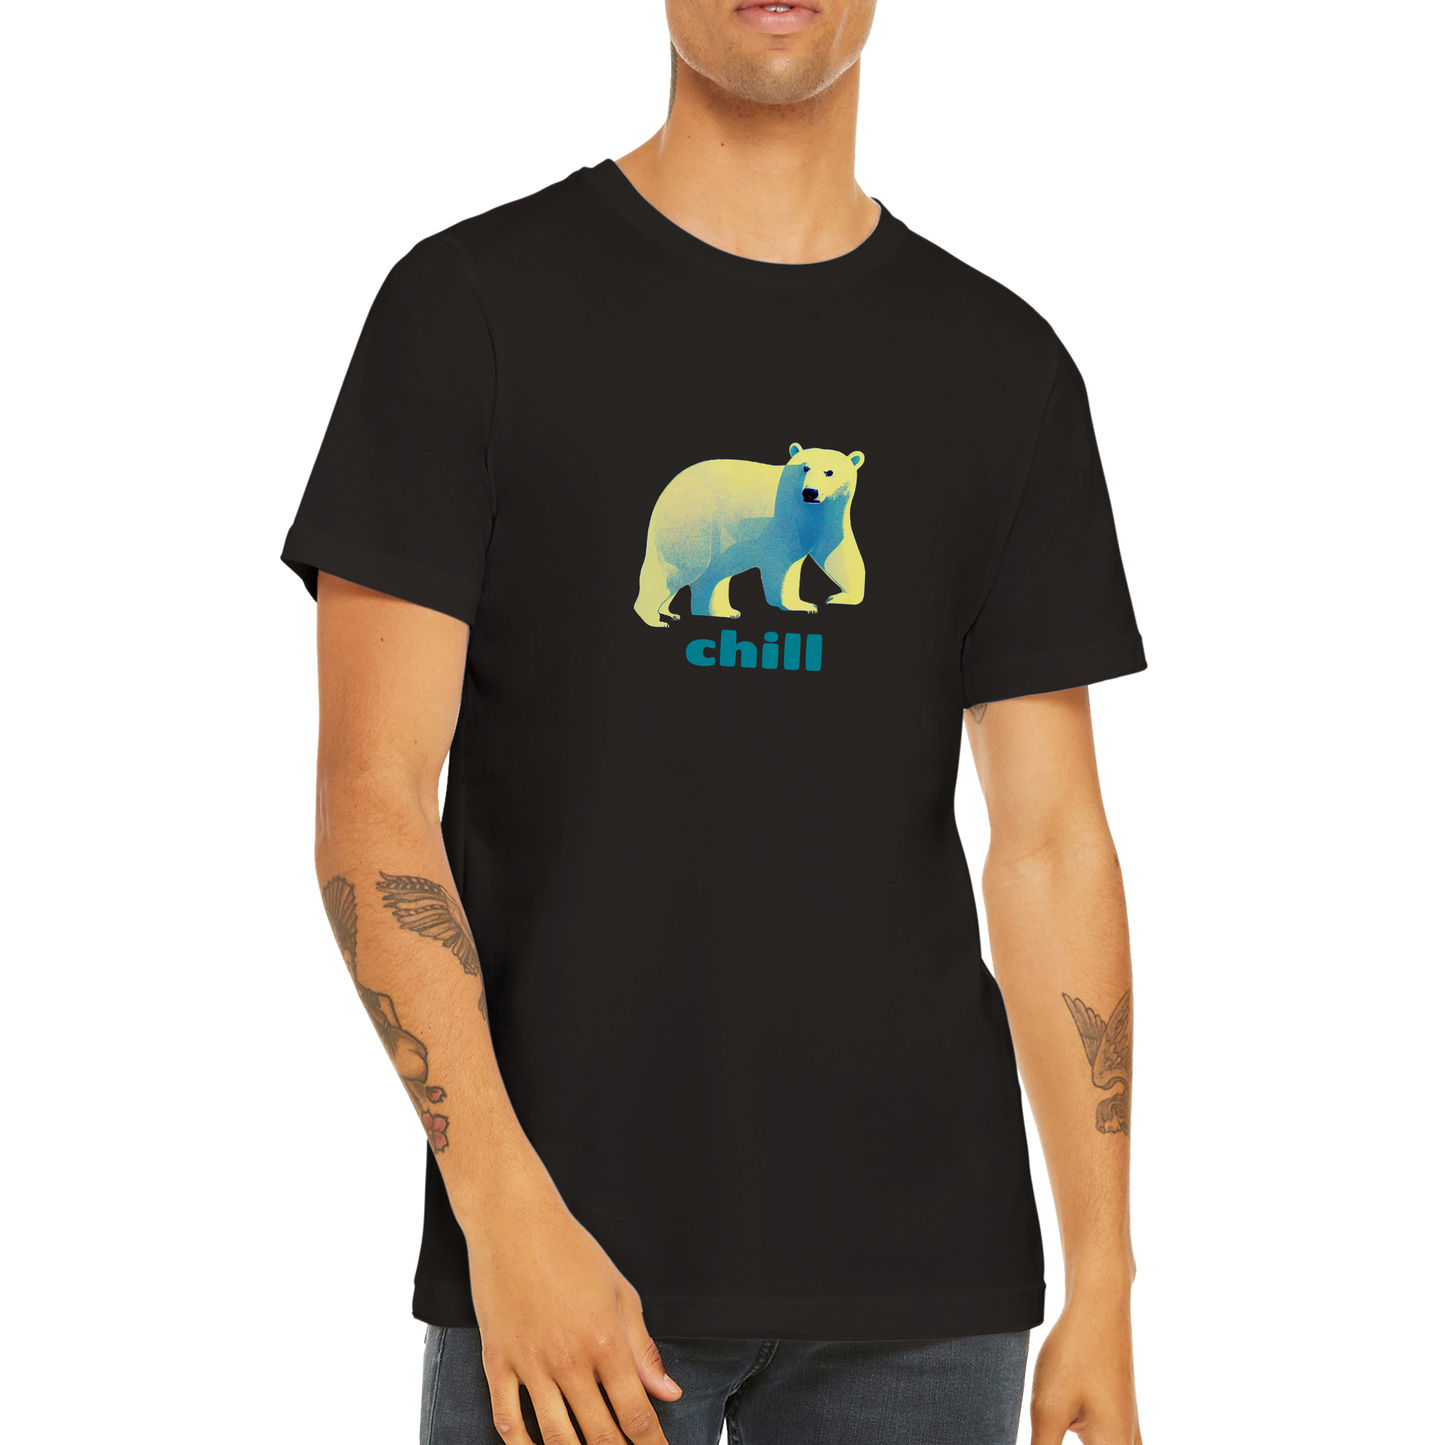 Guy wearing a black t-shirt with a polar bear print with chill caption